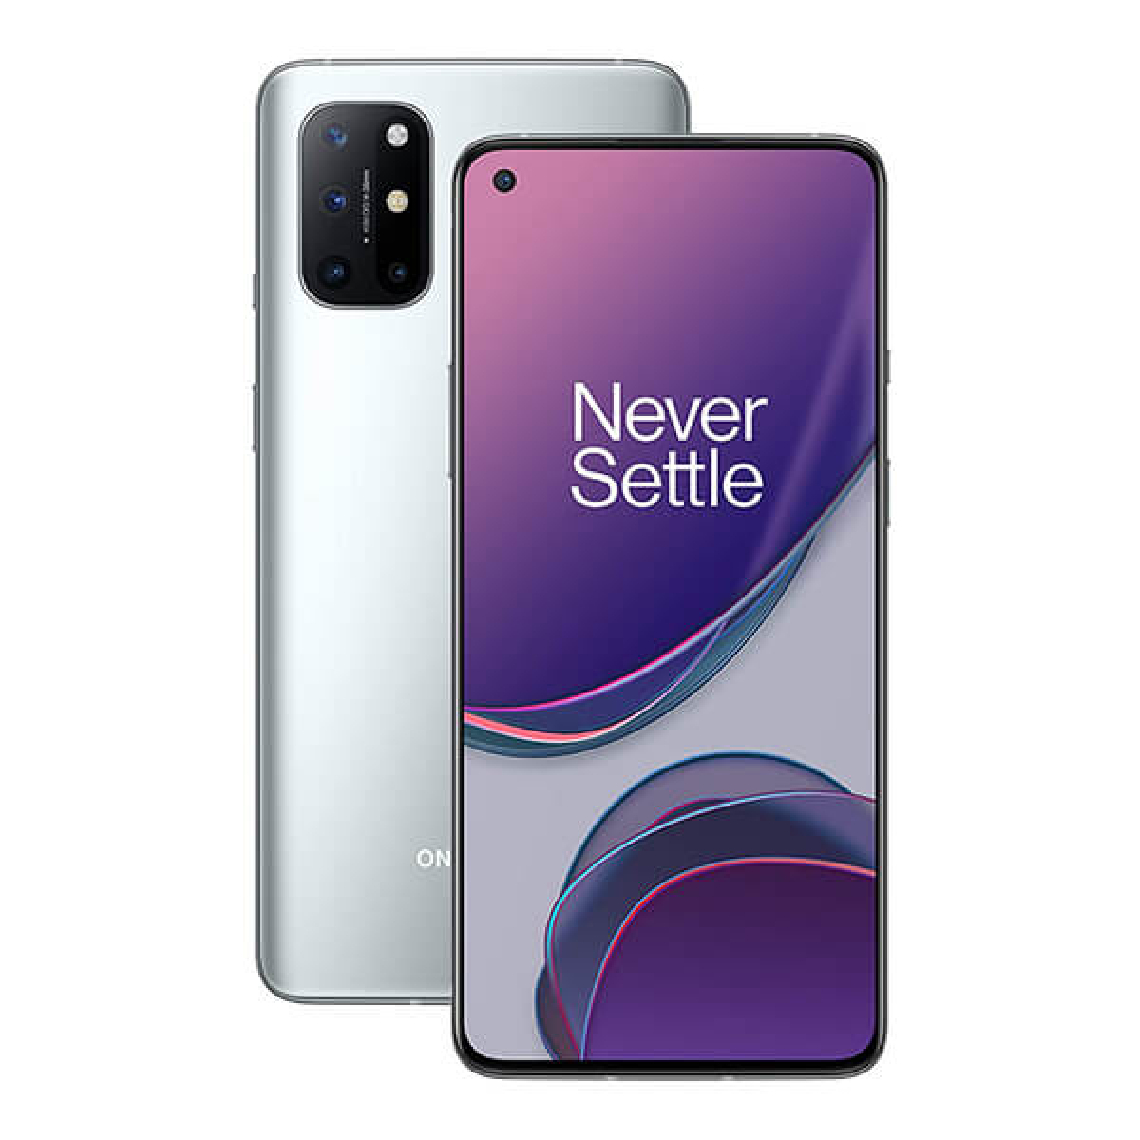 Oneplus - OnePlus 8T 5G 8Go/128Go Argent (Lunar Silver) Dual SIM - Smartphone Android